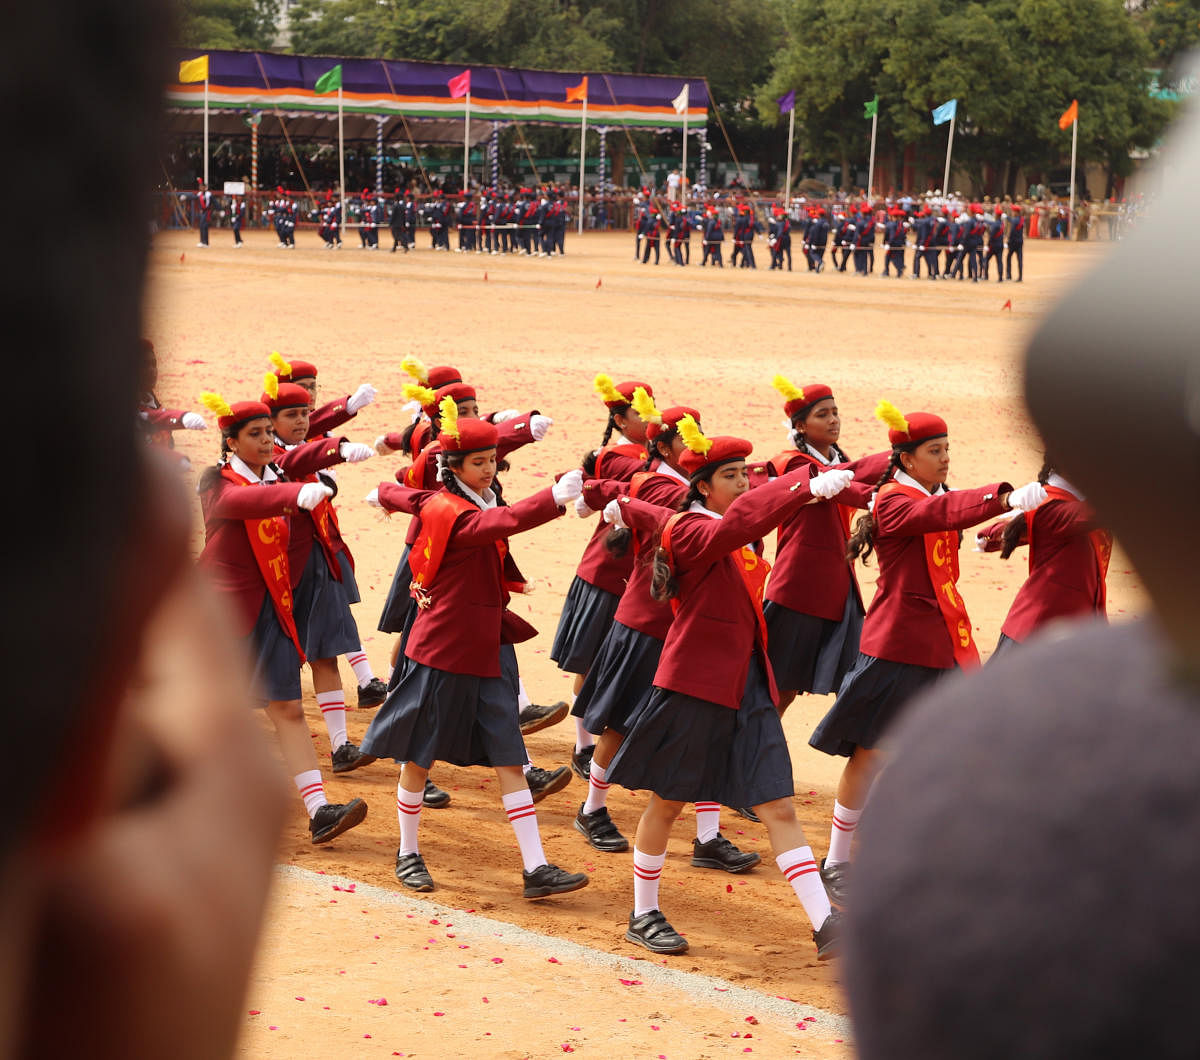 A school contingent performs during the Independence Day parade at Field Marshal Manekshaw Parade grounds in Bengaluru on August 15, 2019.